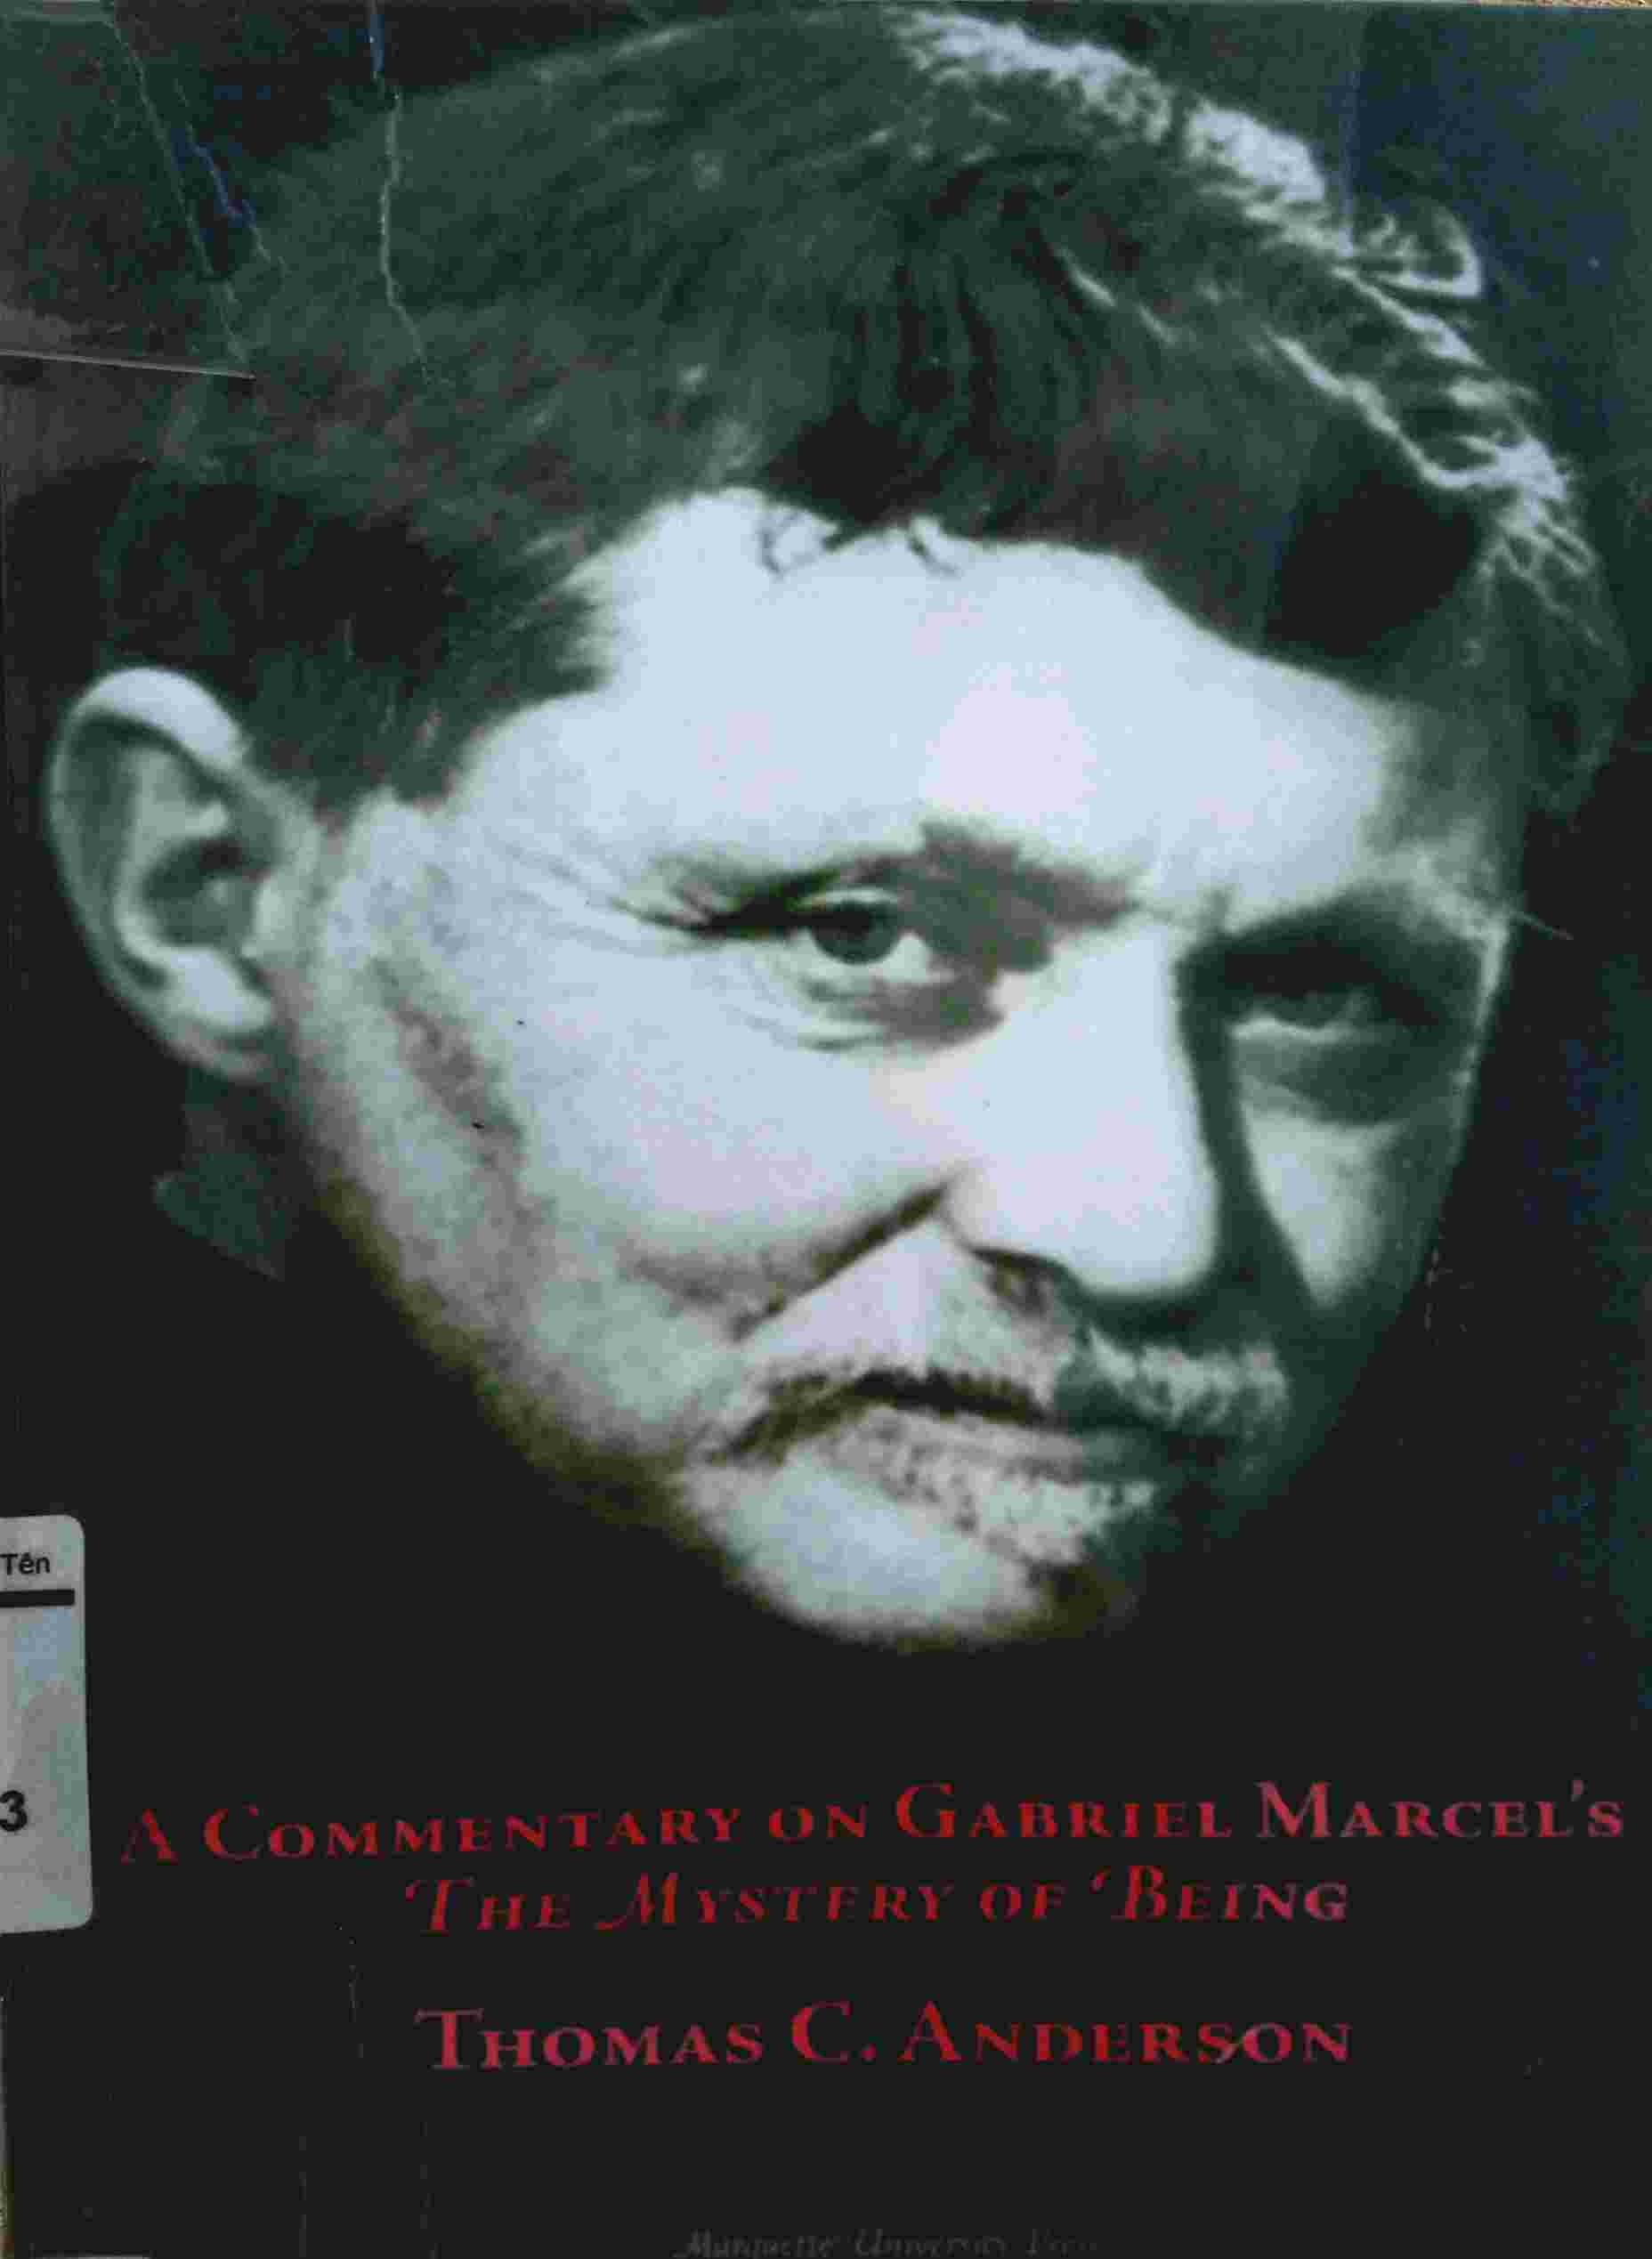 COMMENTARY ON GABRIEL MARCEL's THE MYSTERY OF BEING